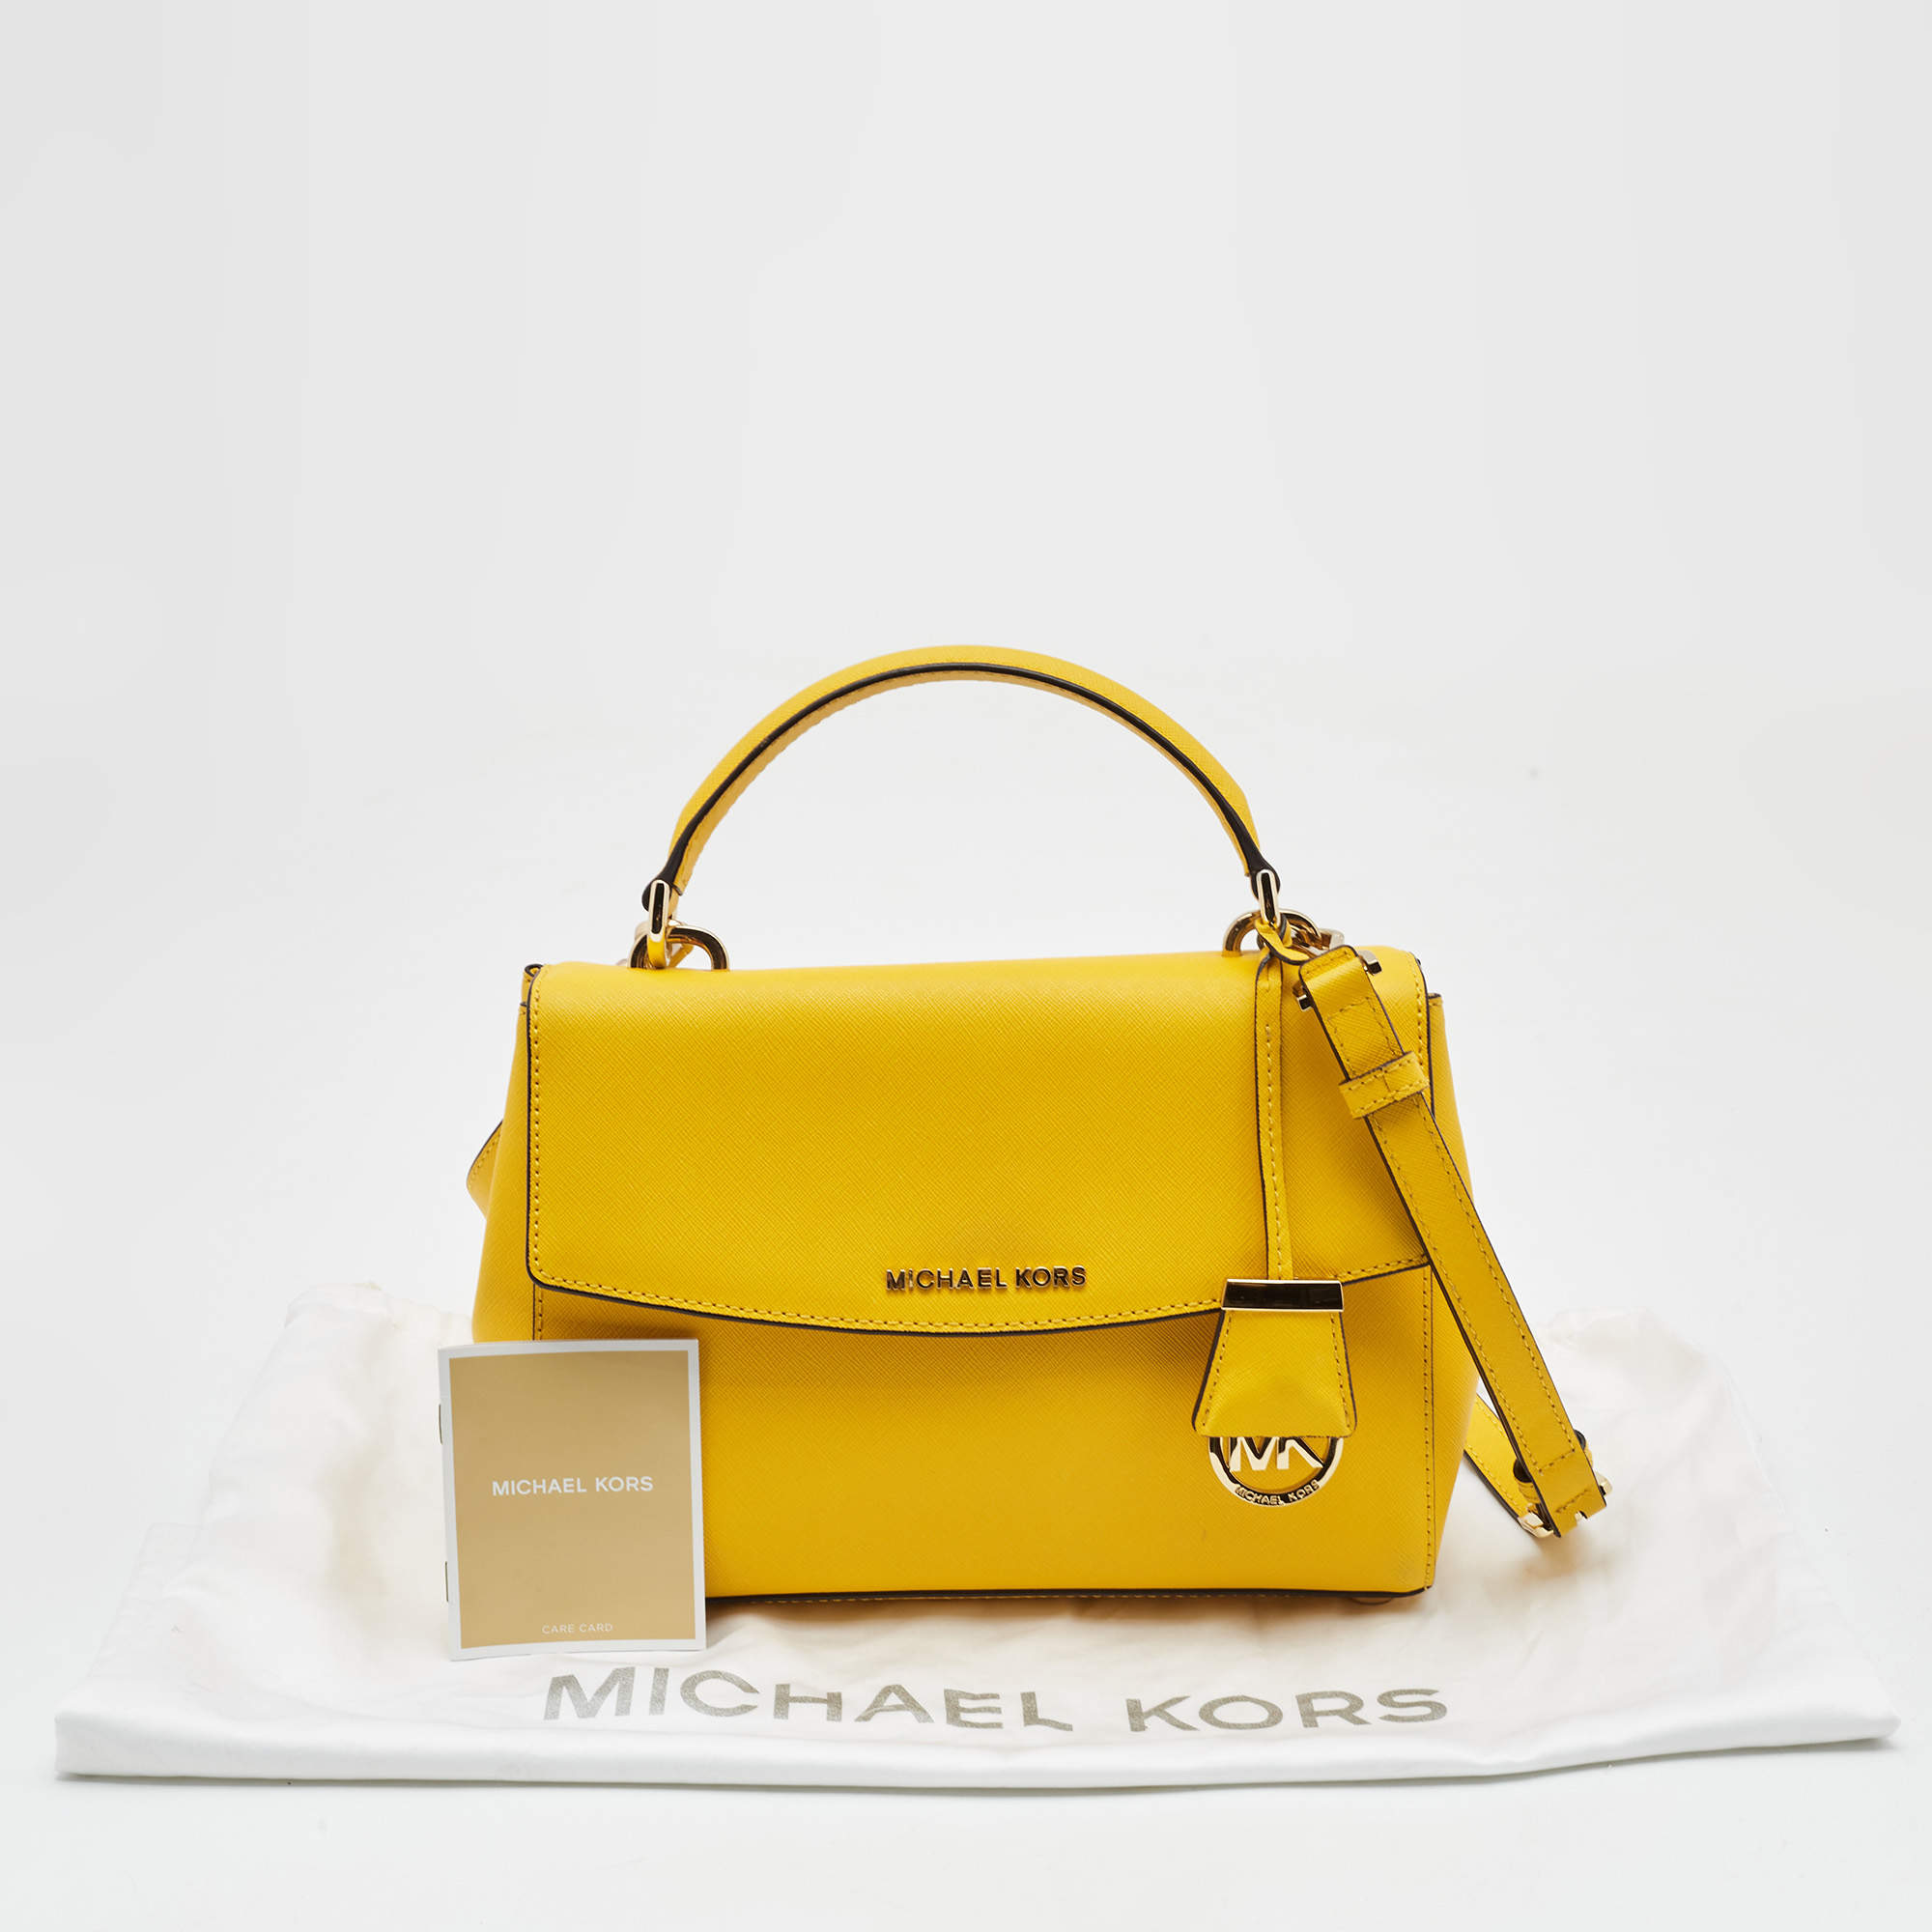 Michael Kors Yellow Saffiano Leather Small Ava Top Handle Bag - $75 - From  Timand